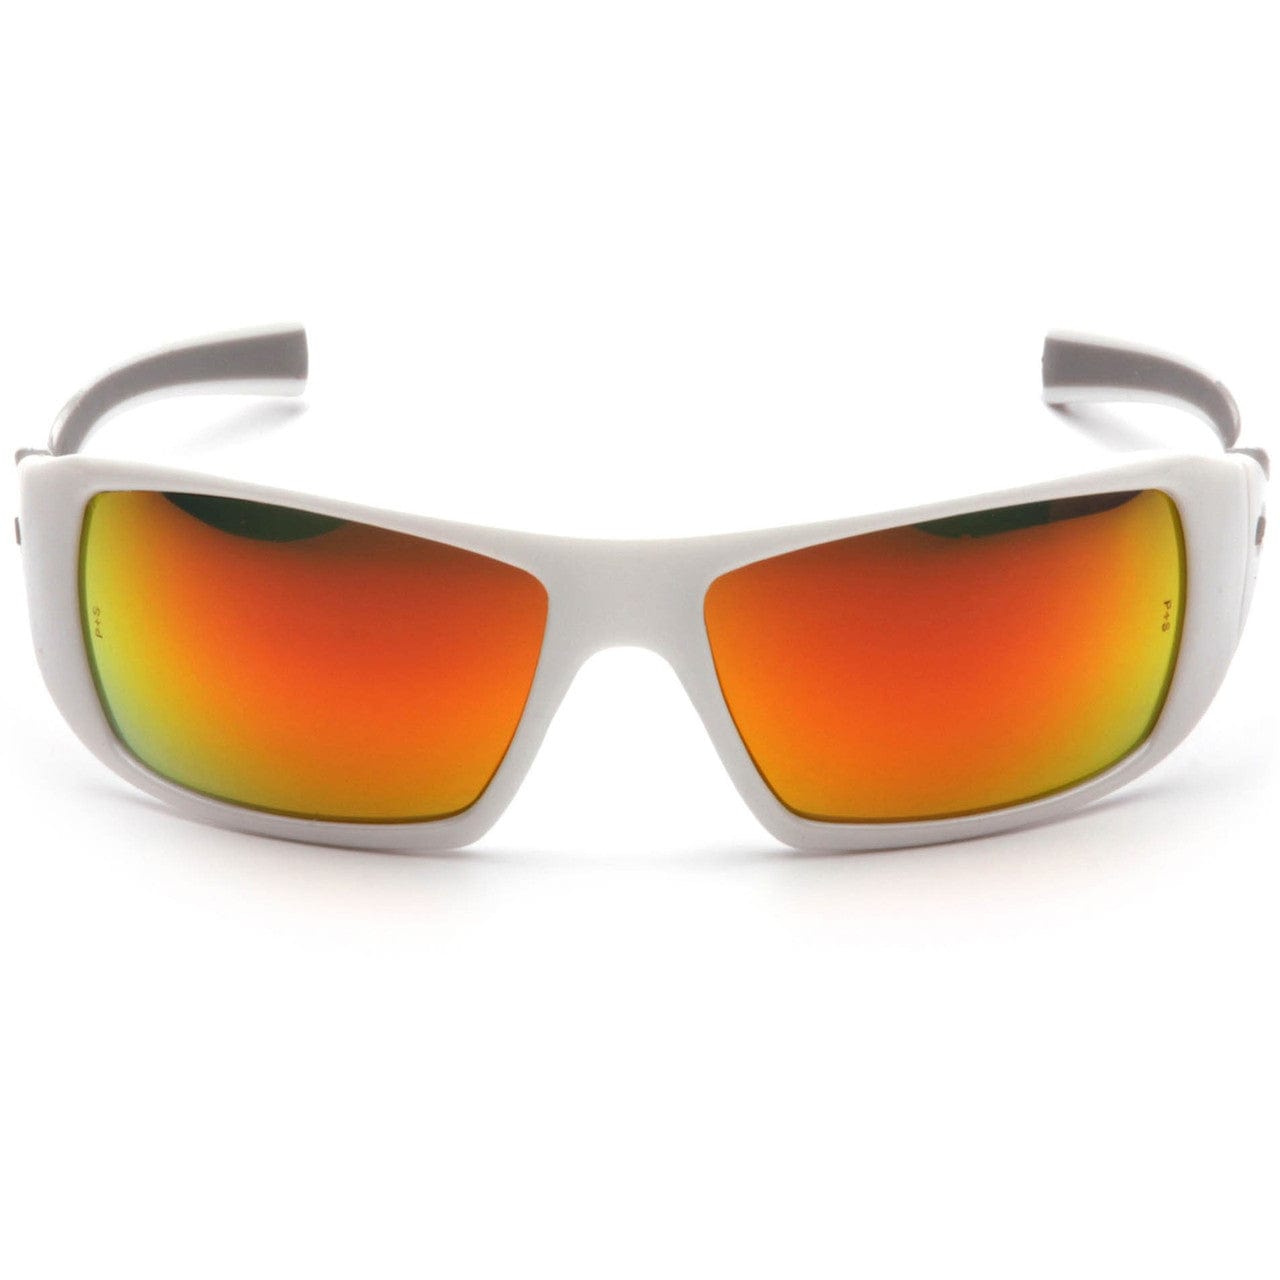 Pyramex Goliath Safety Glasses with Pearl White Frame and Sky Red Mirror Lens SW5655D Front View